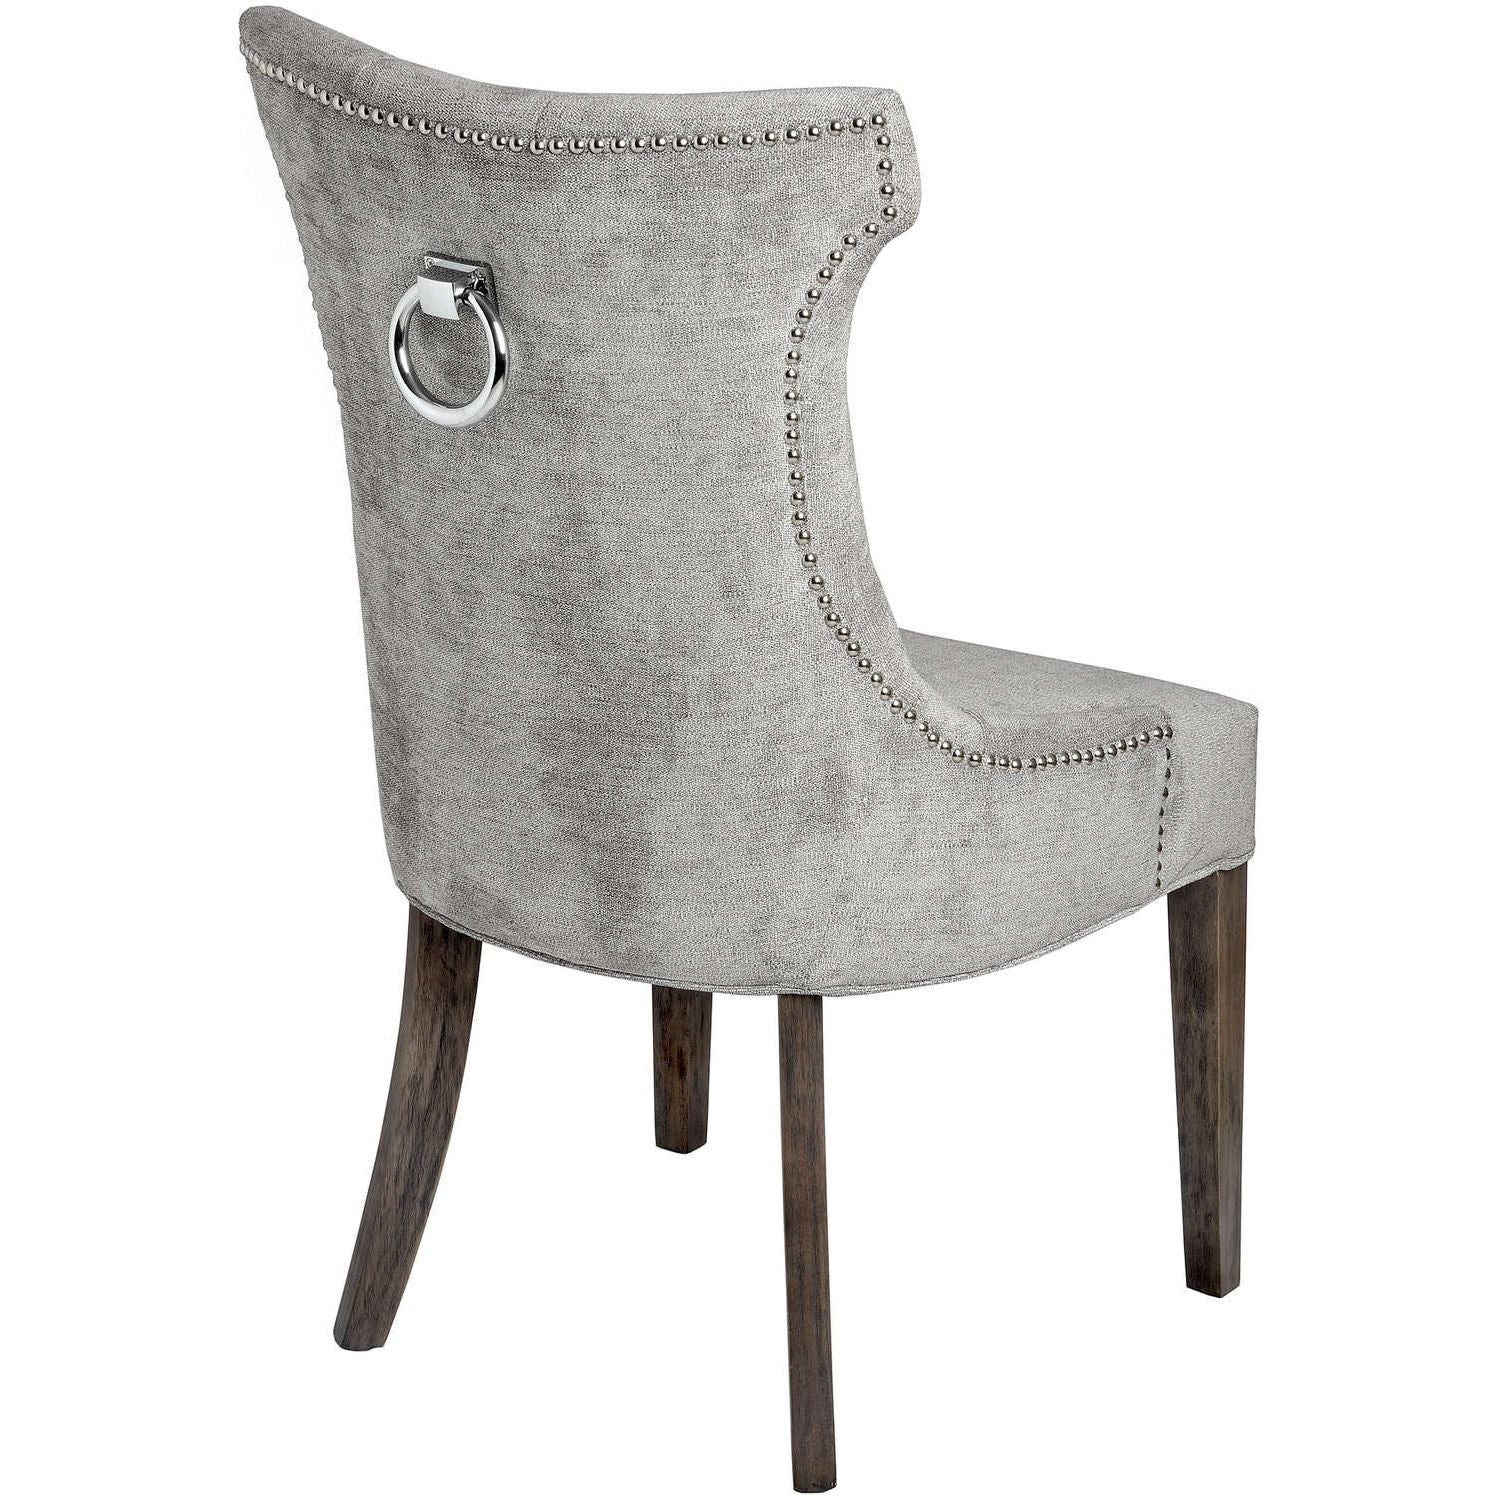 Silver High Wing Ring Backed Dining Chair - Ashton and Finch